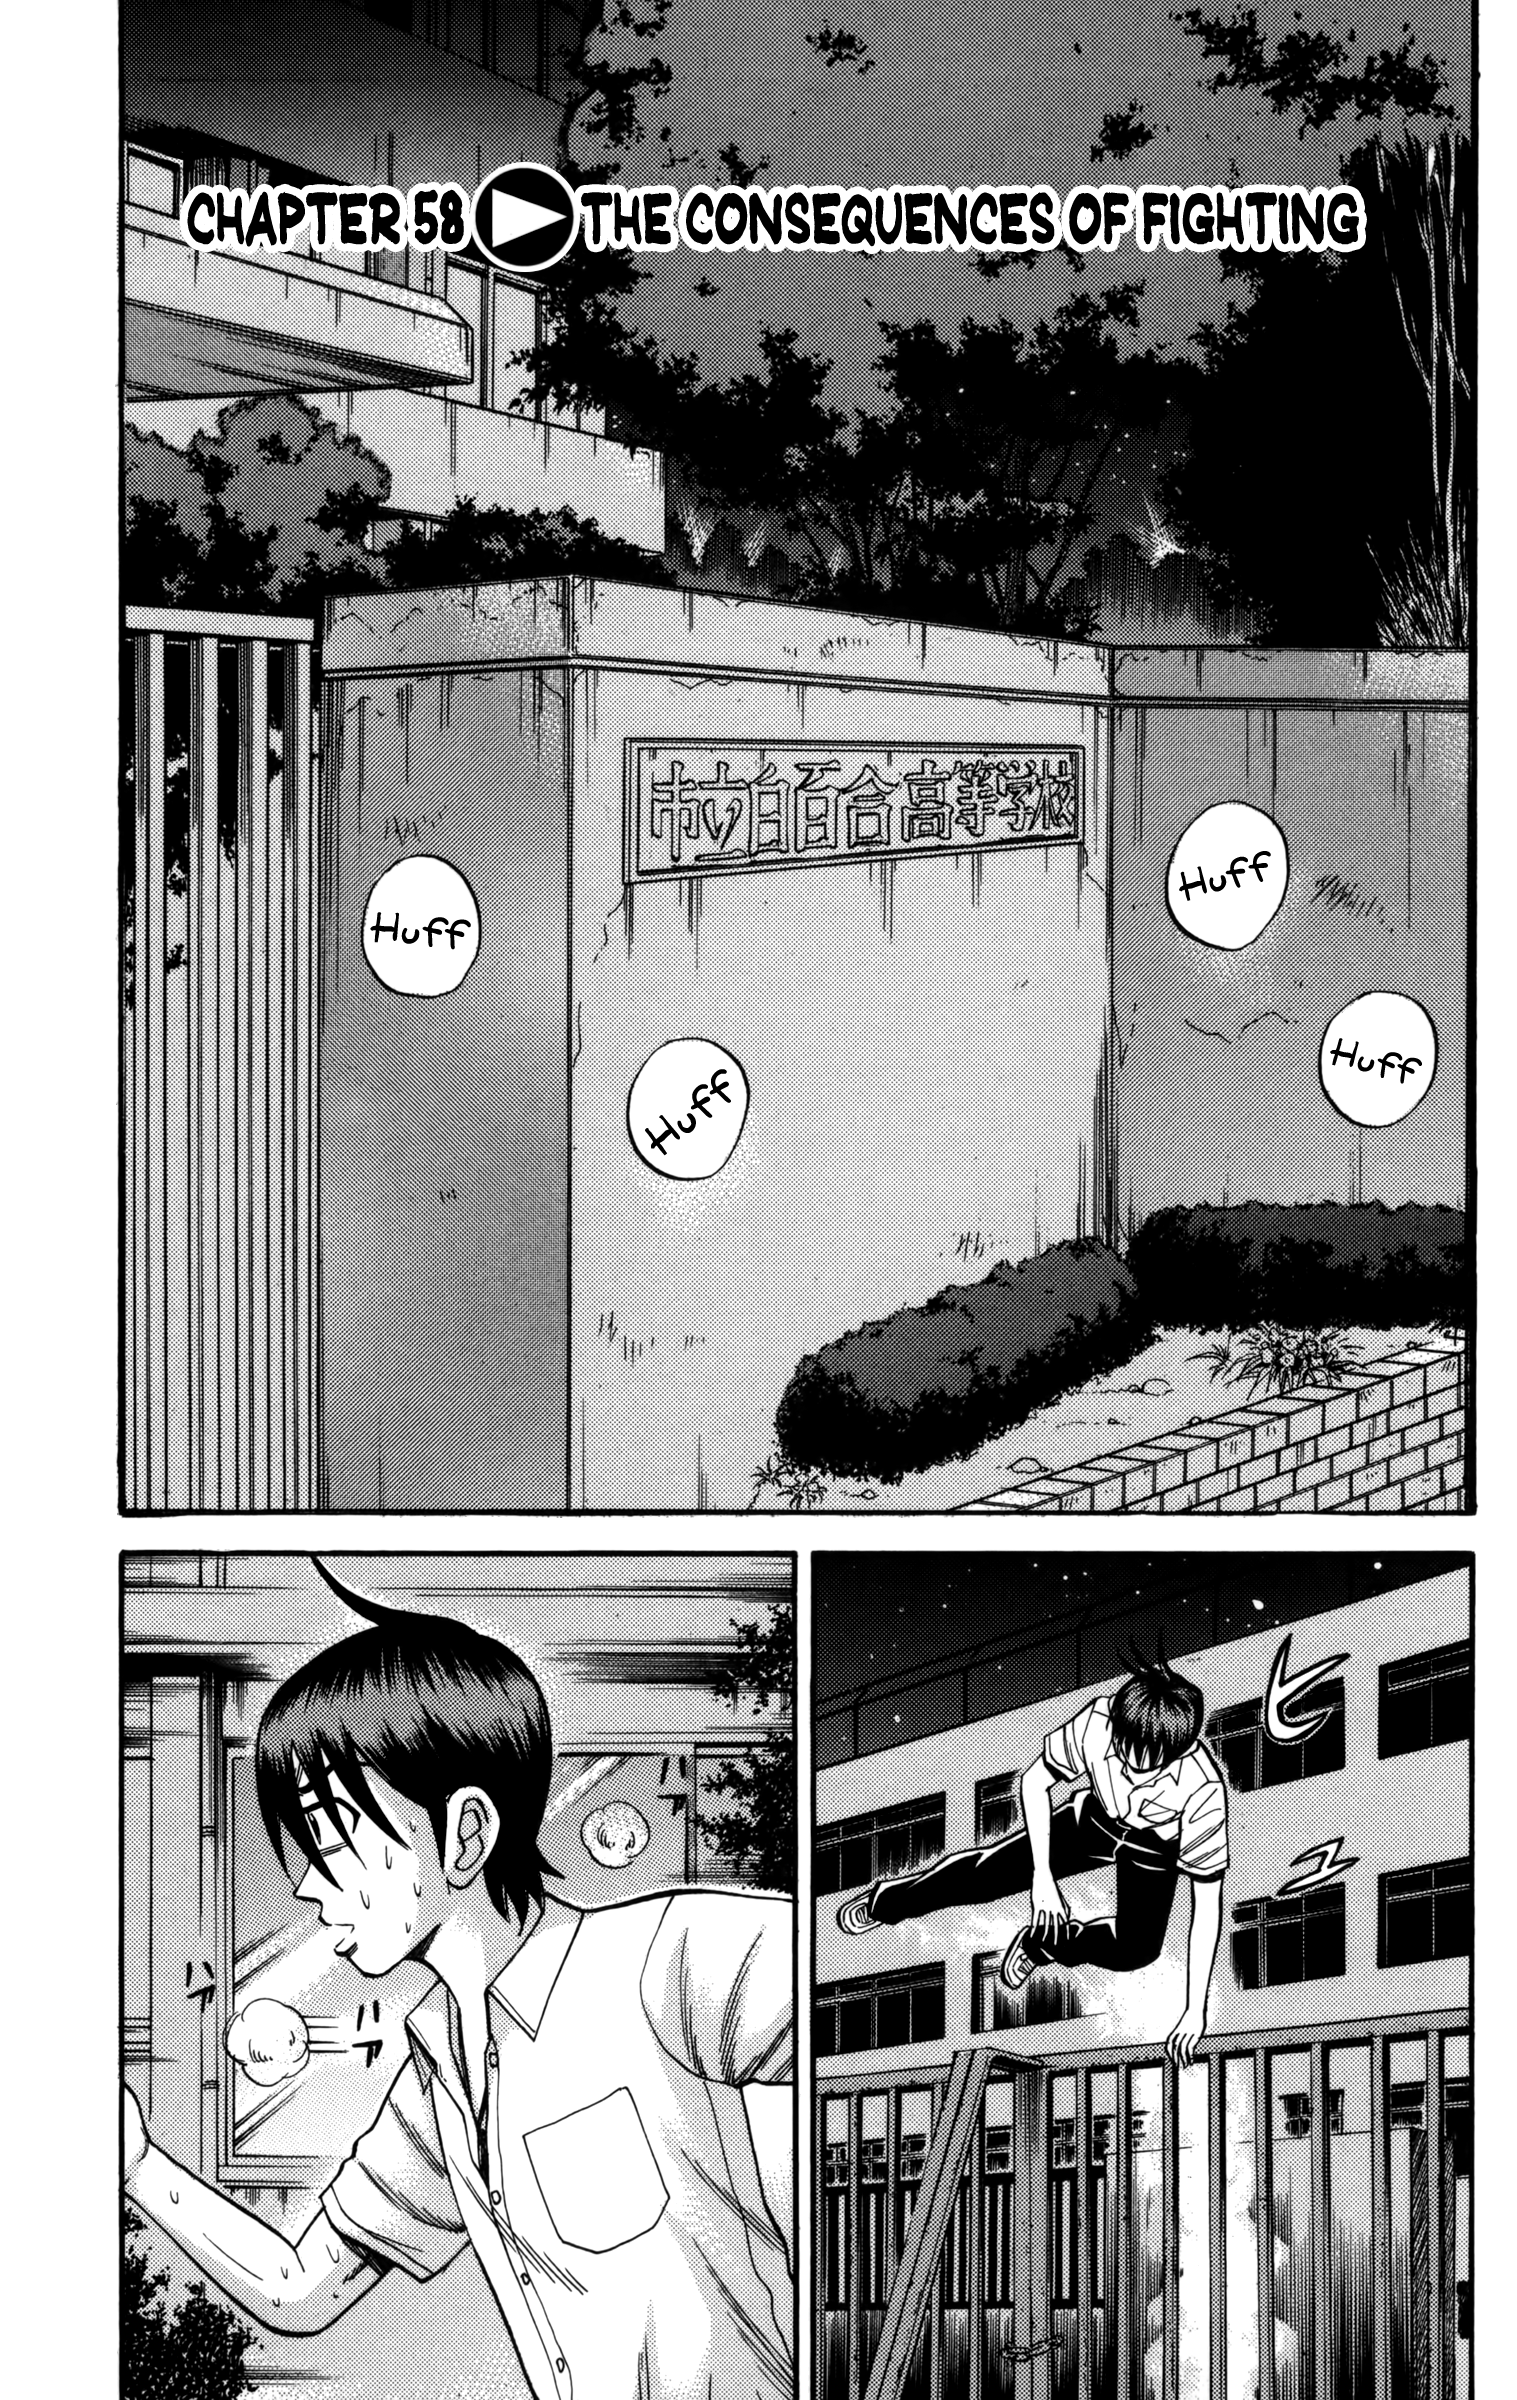 Nanba Mg5 Vol.7 Chapter 58: The Consequences Of Fighting - Picture 1